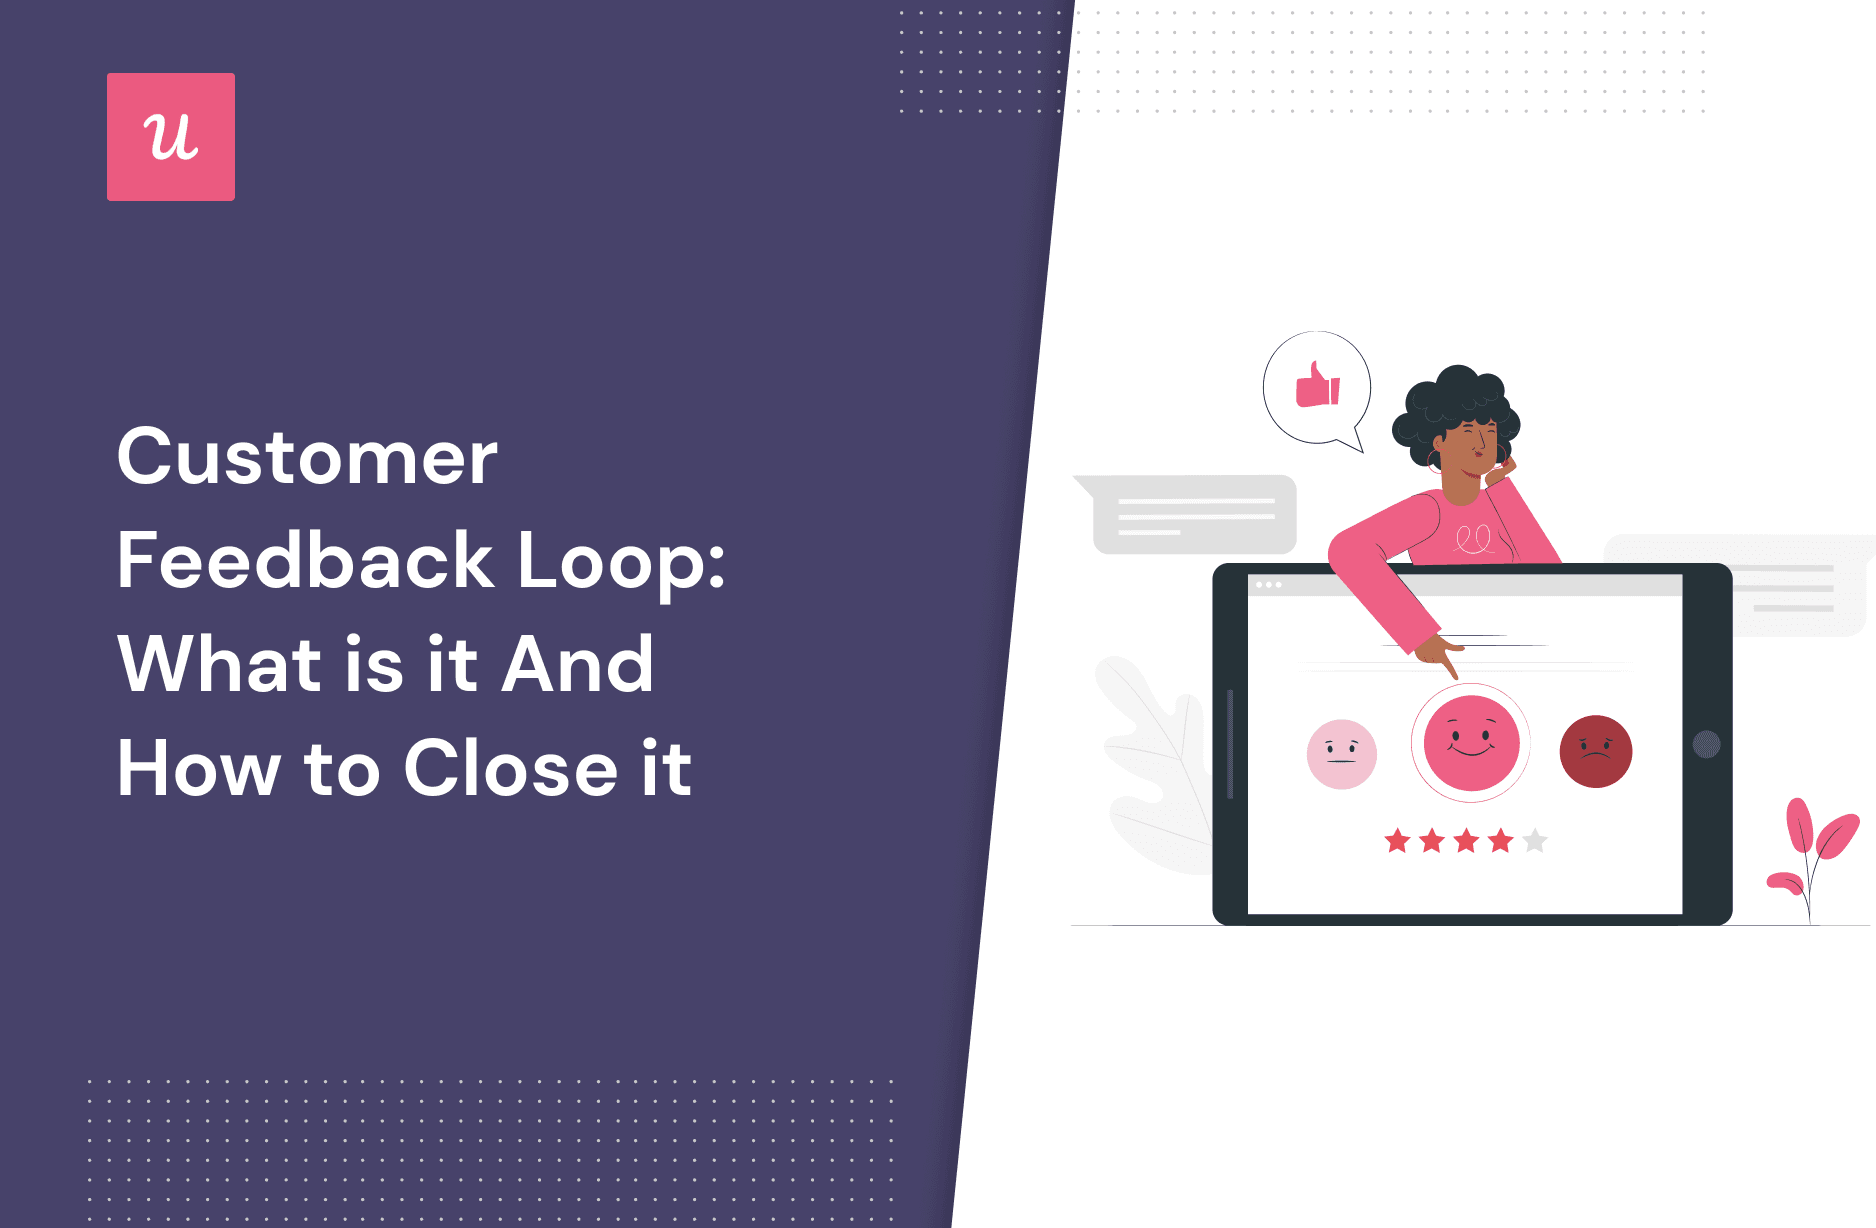 Customer Feedback Loop: What is it and How To Close it